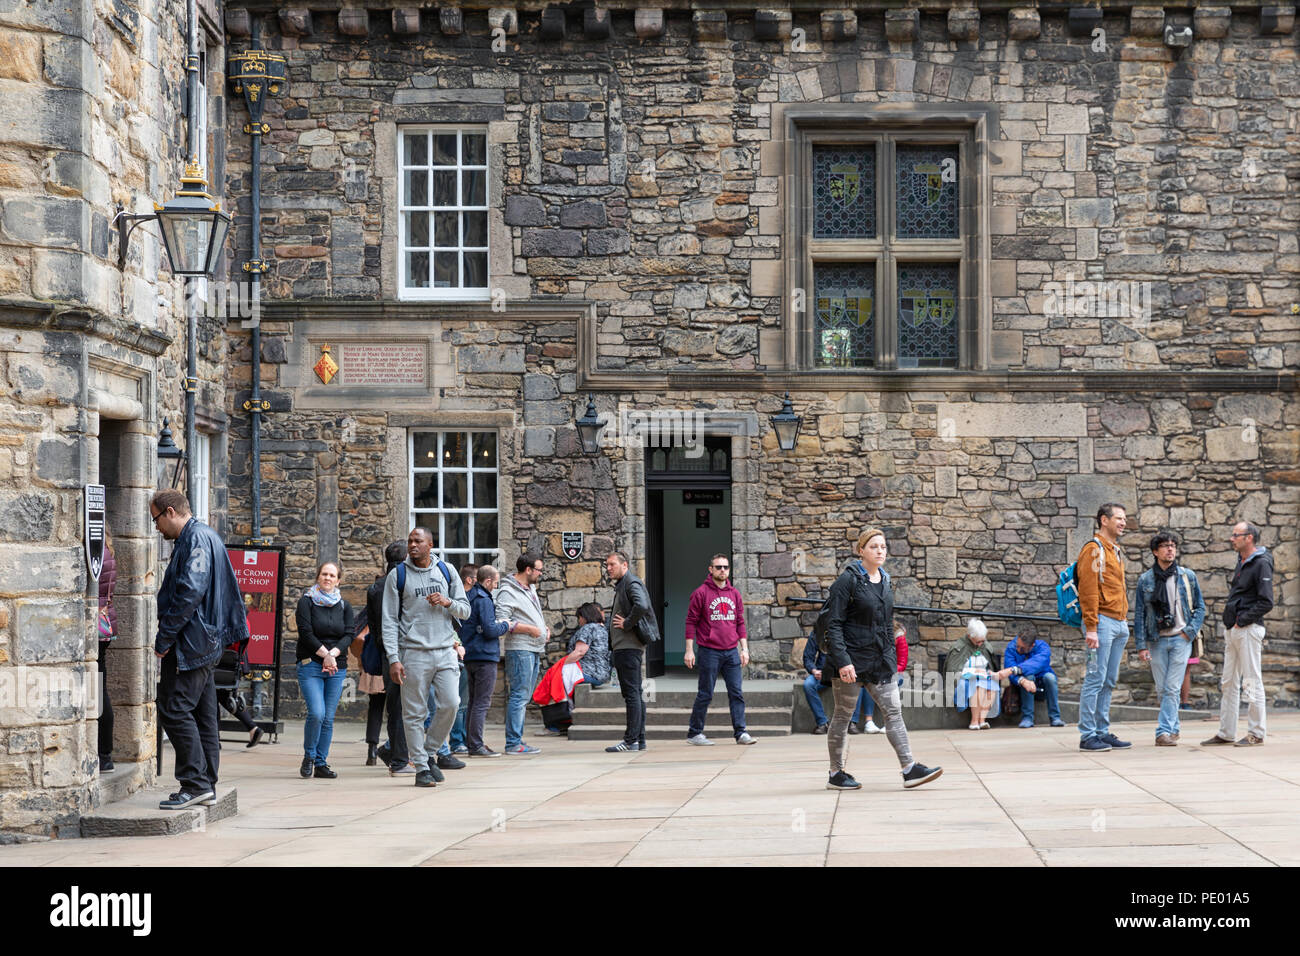 Courtyard Edinburgh castle with visitors and tourists Stock Photo